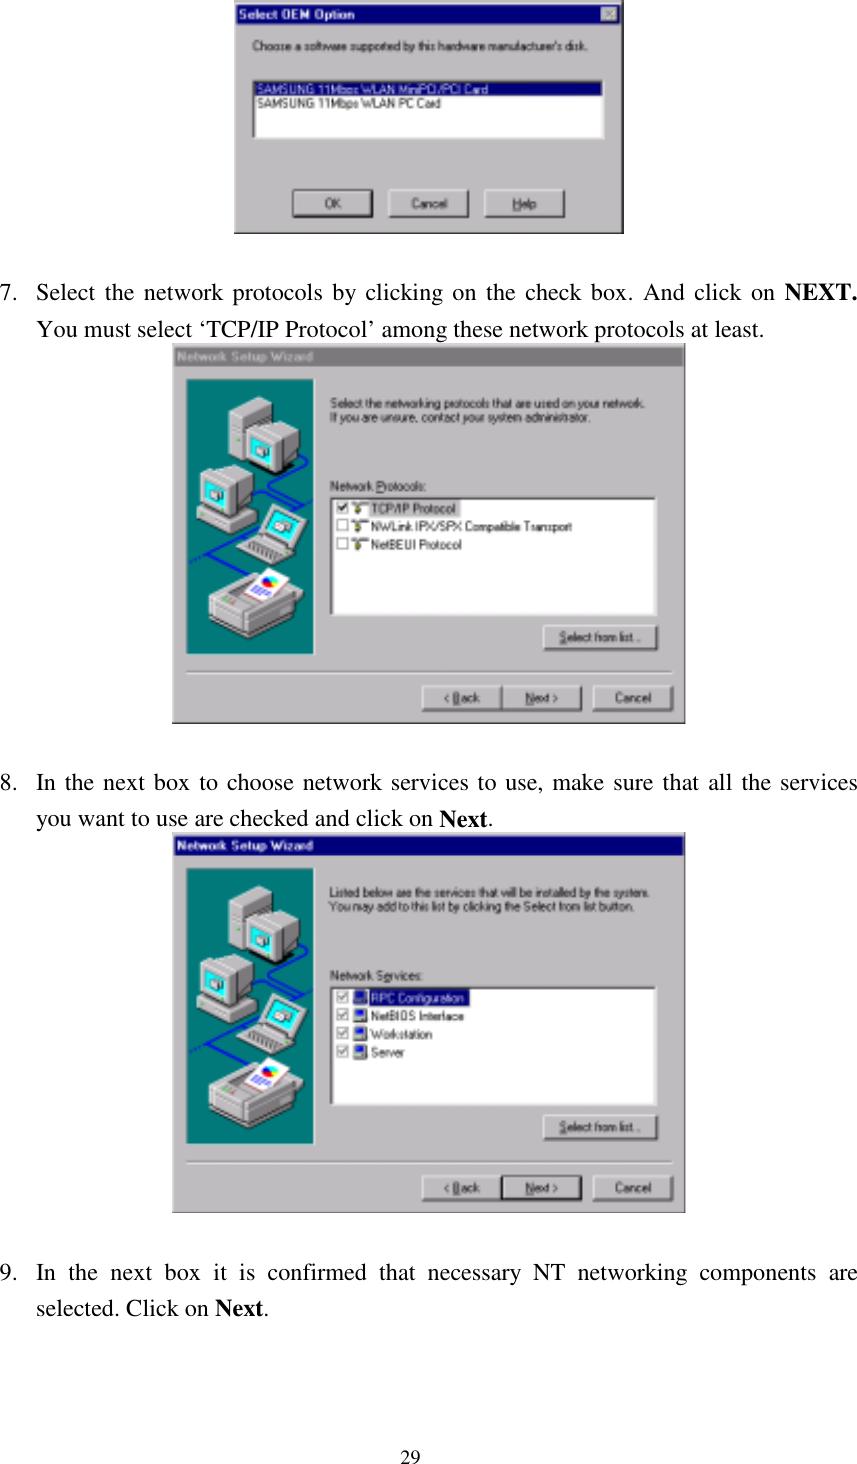  29   7.  Select the network protocols by clicking on the check box. And click on NEXT. You must select ‘TCP/IP Protocol’ among these network protocols at least.   8.  In the next box to choose network services to use, make sure that all the services you want to use are checked and click on Next.   9.  In the next box it is confirmed that necessary NT networking components are selected. Click on Next.  